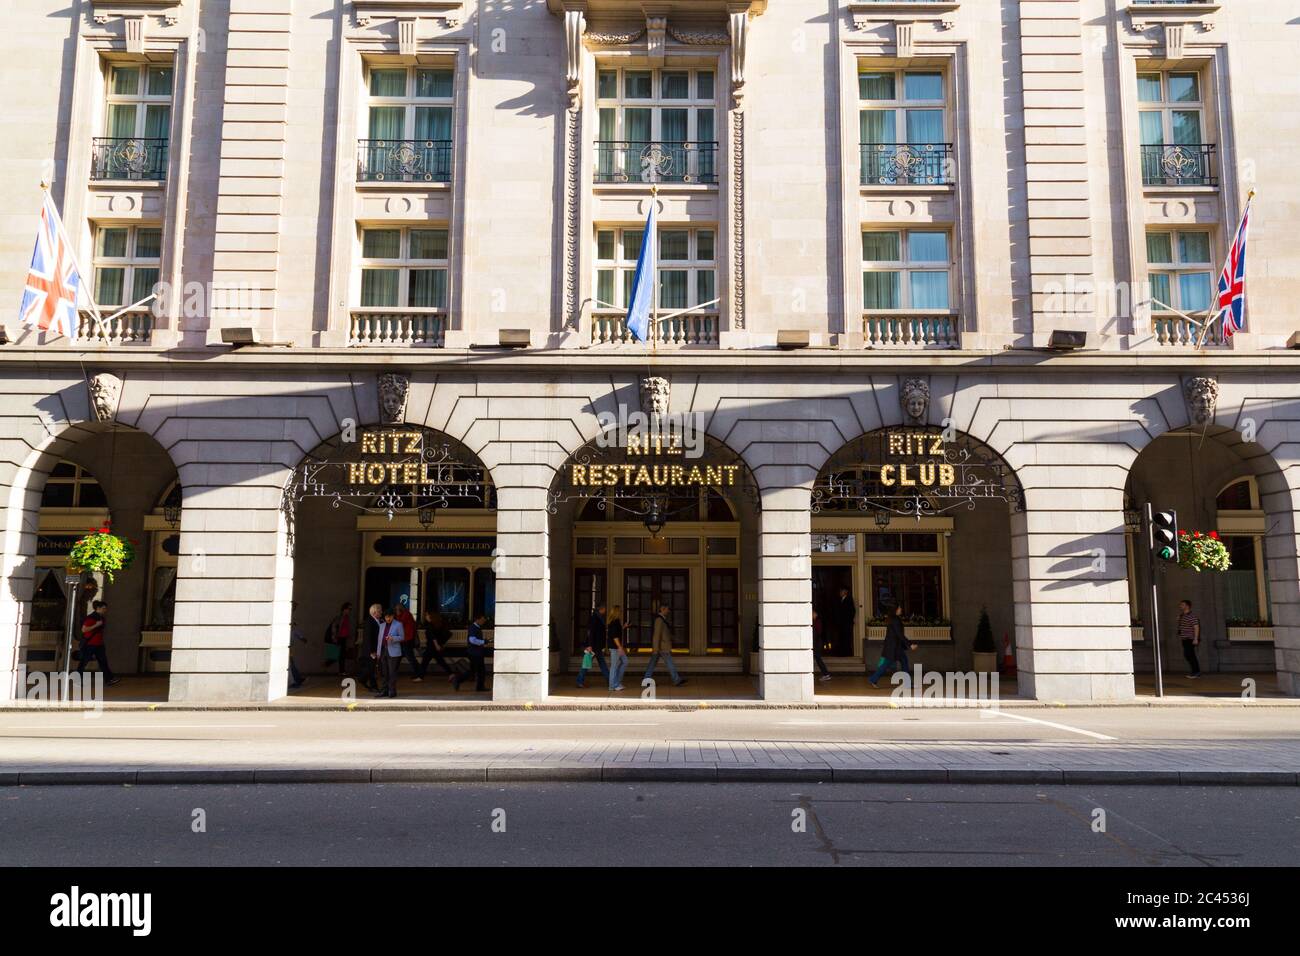 LONDON, UK - 26TH SEPTEMBER 2014: The outside of the RITZ along Piccadilly during the day. People can be seen outside the building Stock Photo